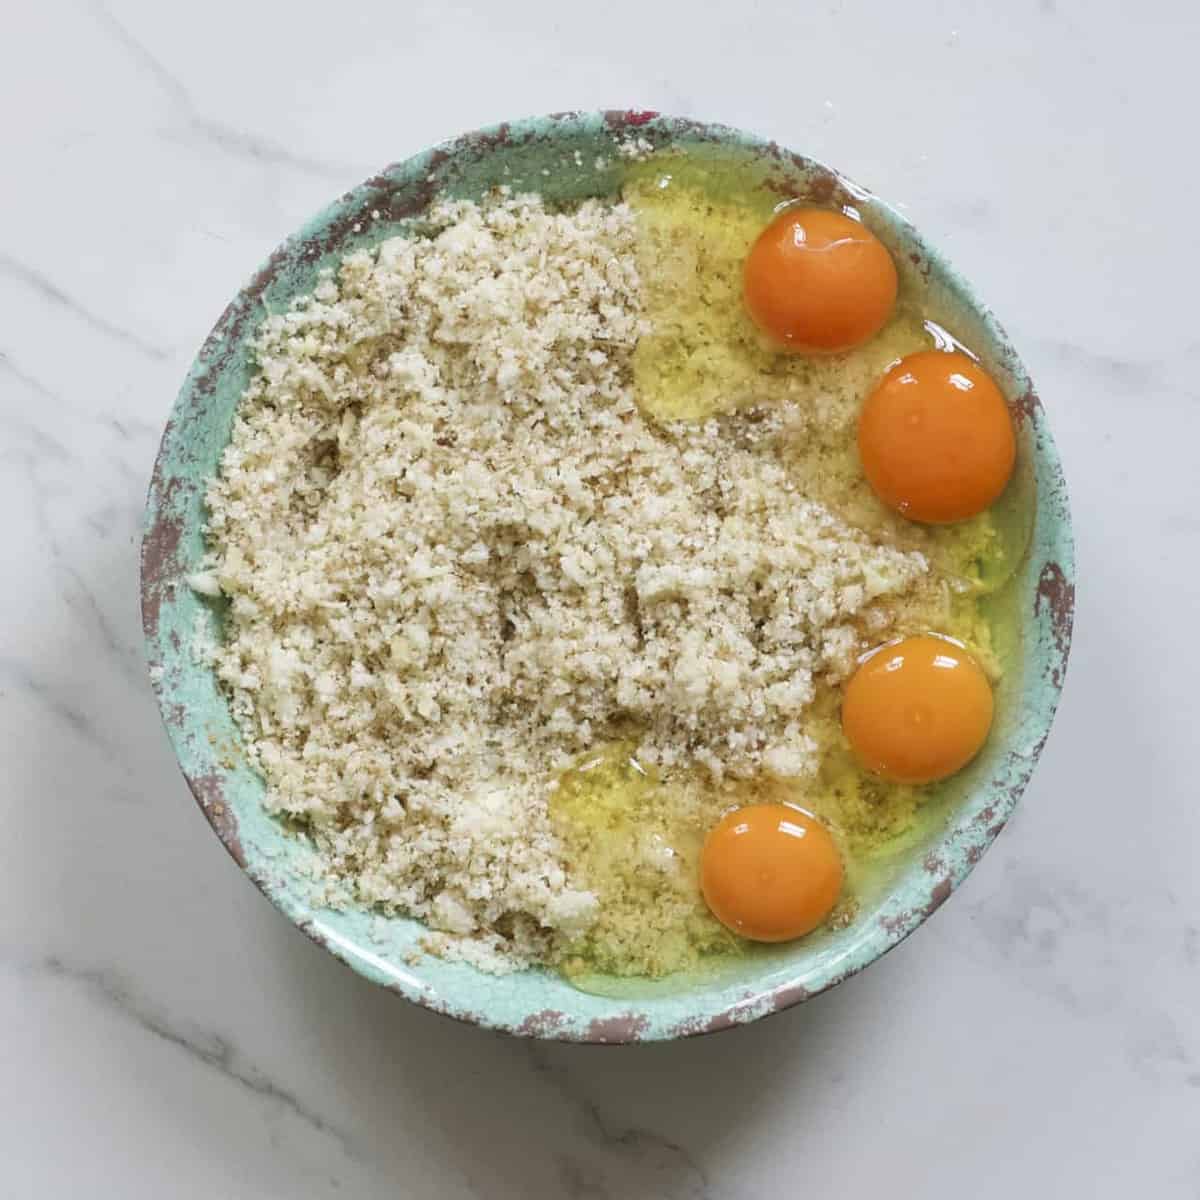 Mini pizzas base mixture and four cracked eggs in a green bowl